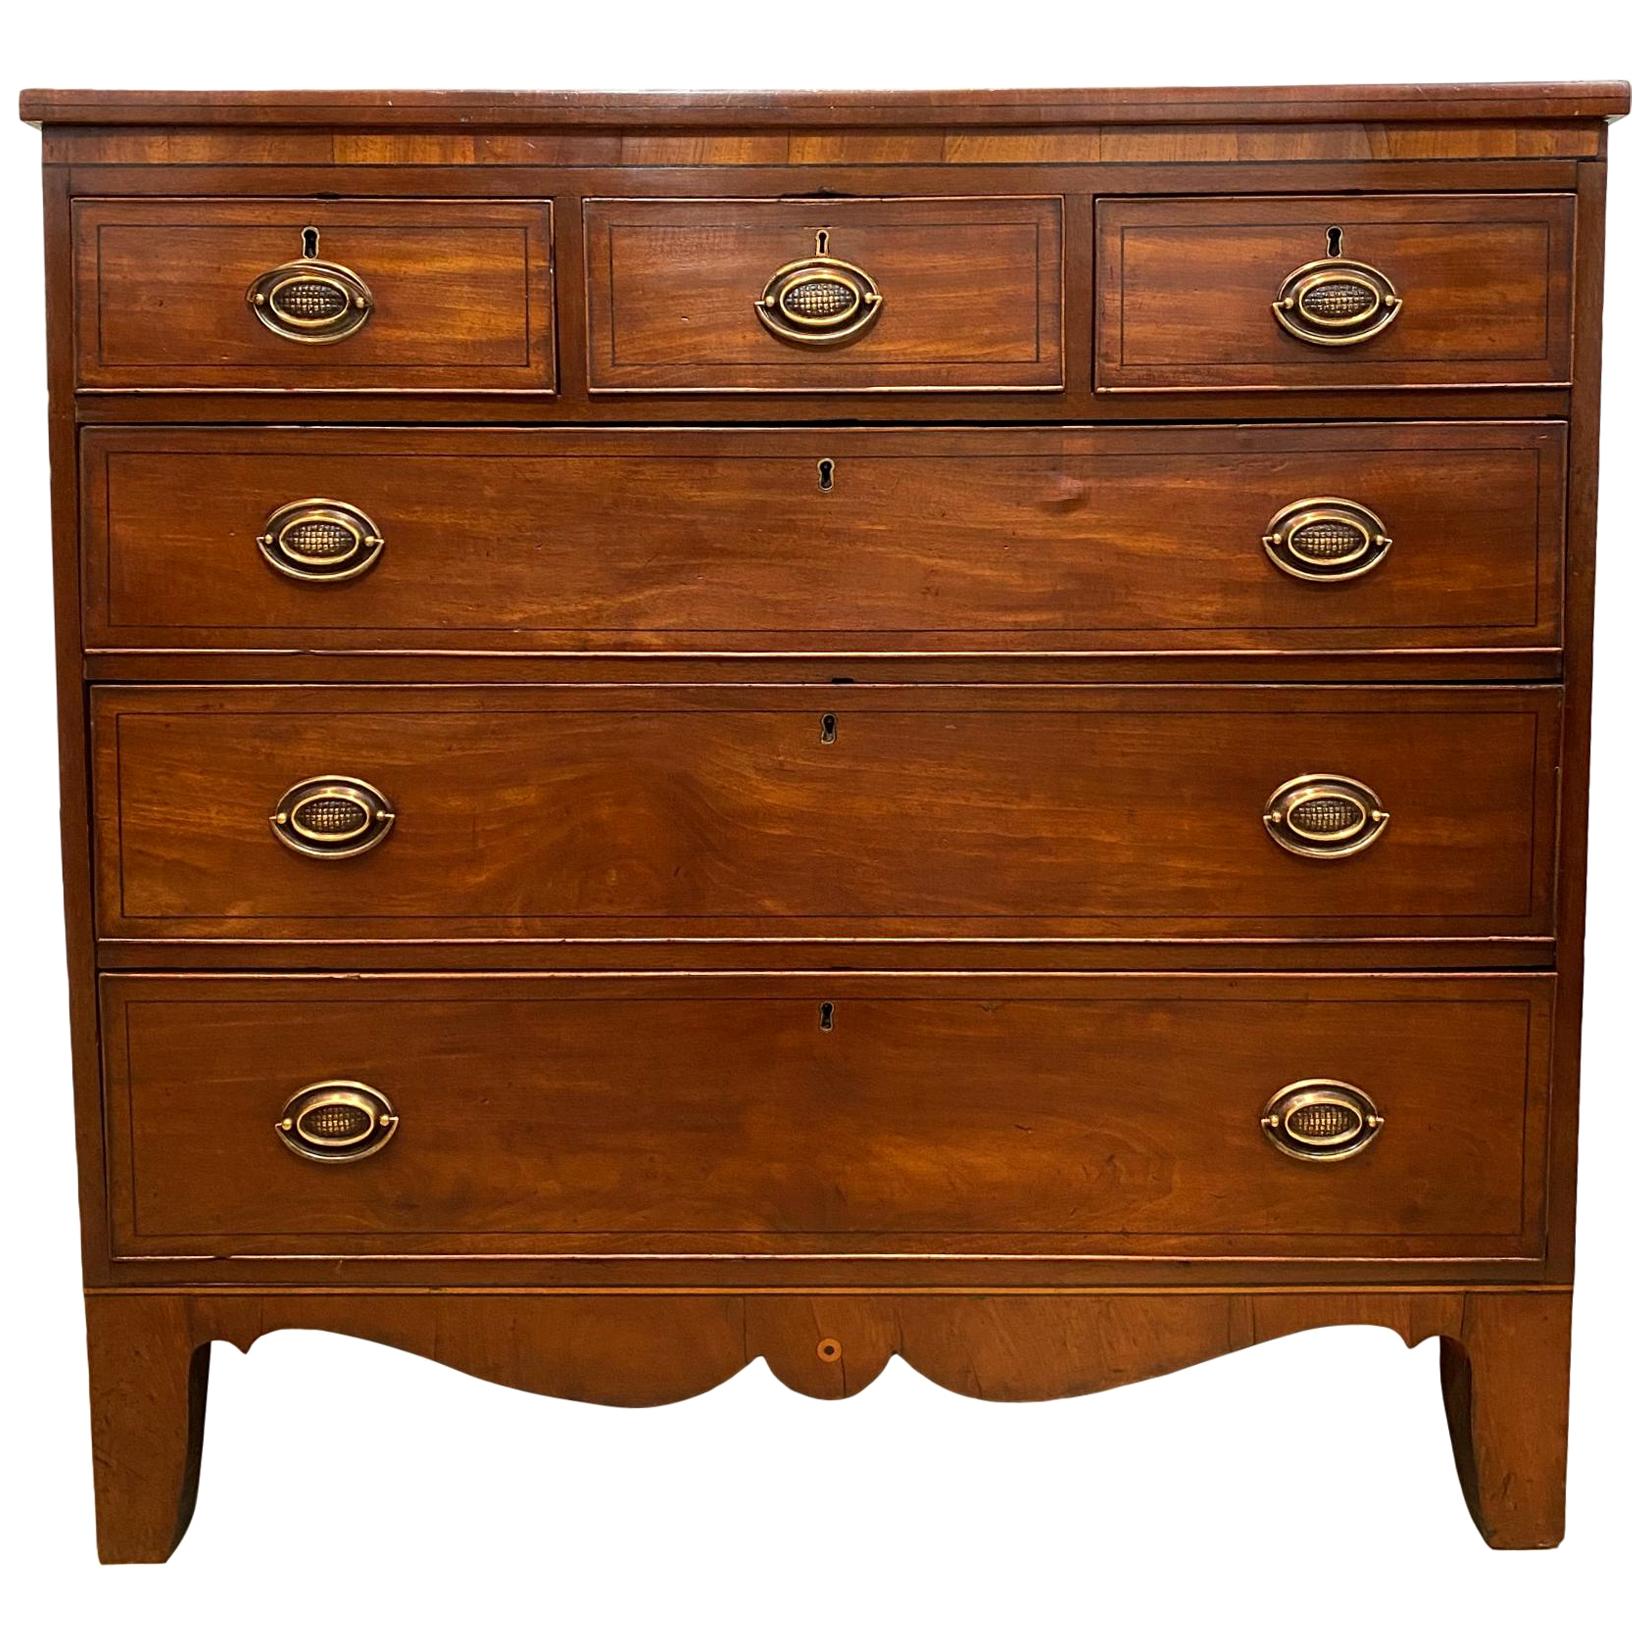 George III Mahogany Chest-of-Drawers with Cross-Banding and Inlays, circa 1820